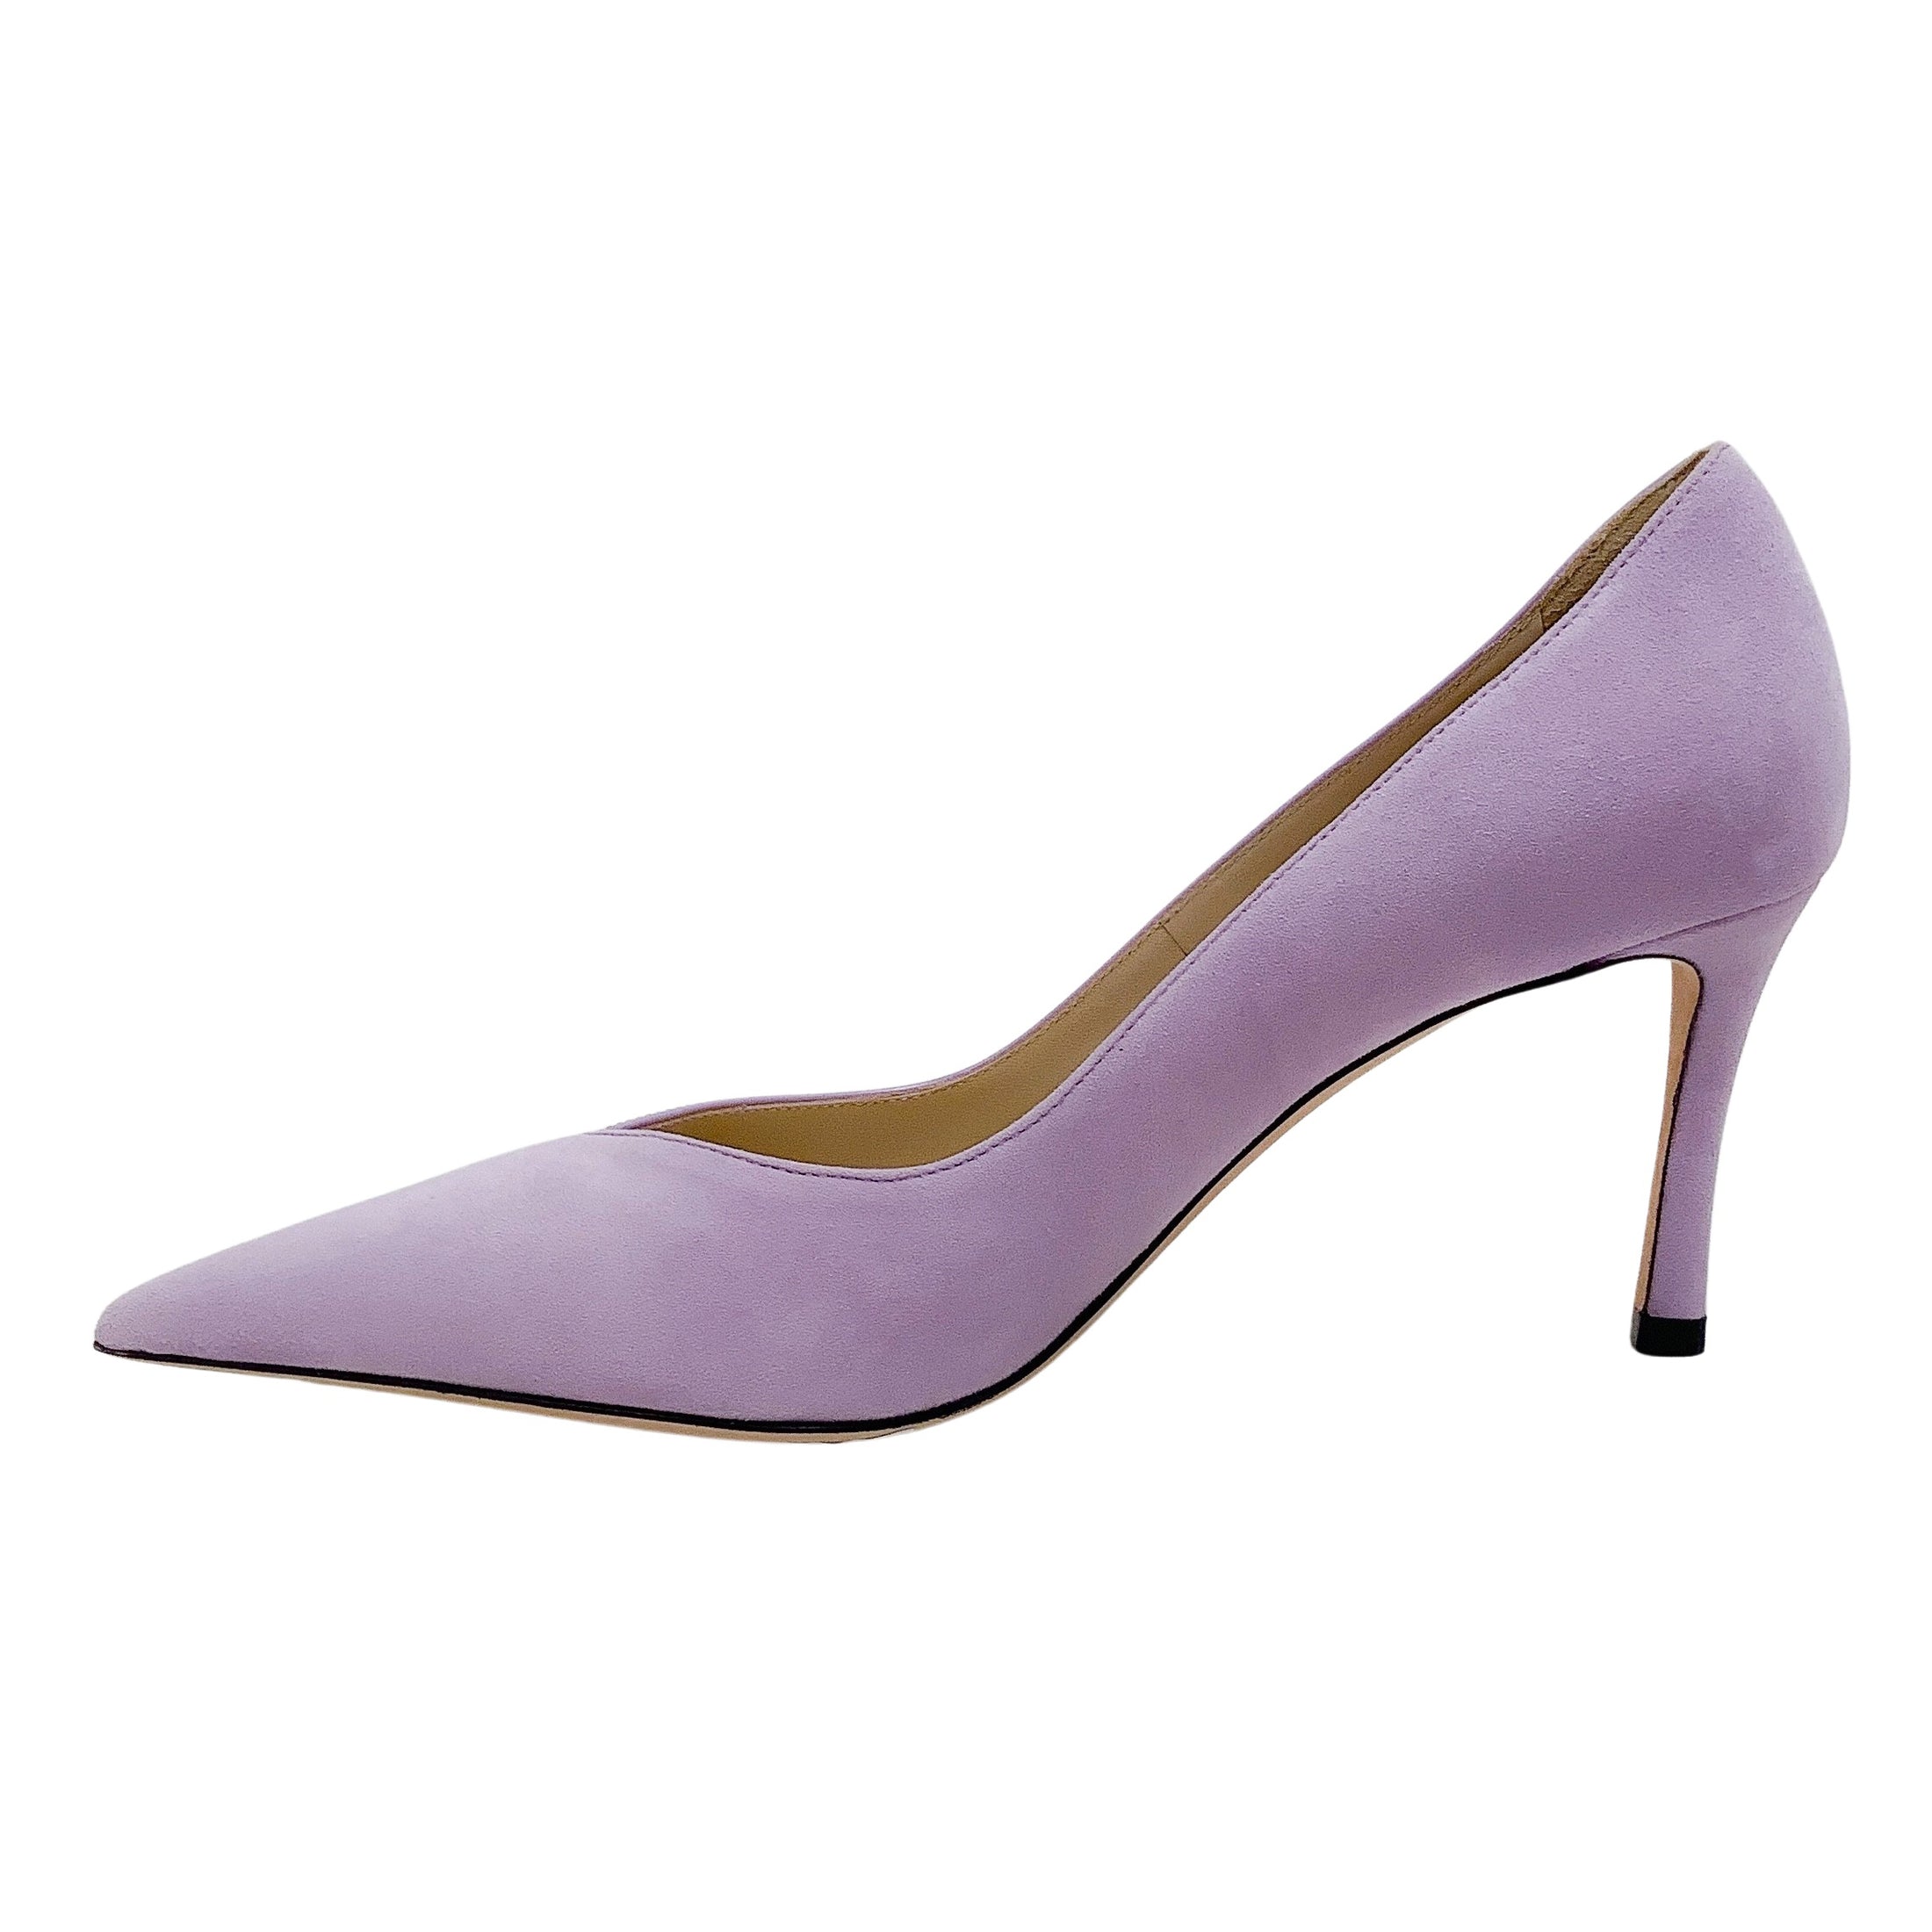 Jimmy Choo Wisteria Suede / Patent Leather Cass 75 Pumps